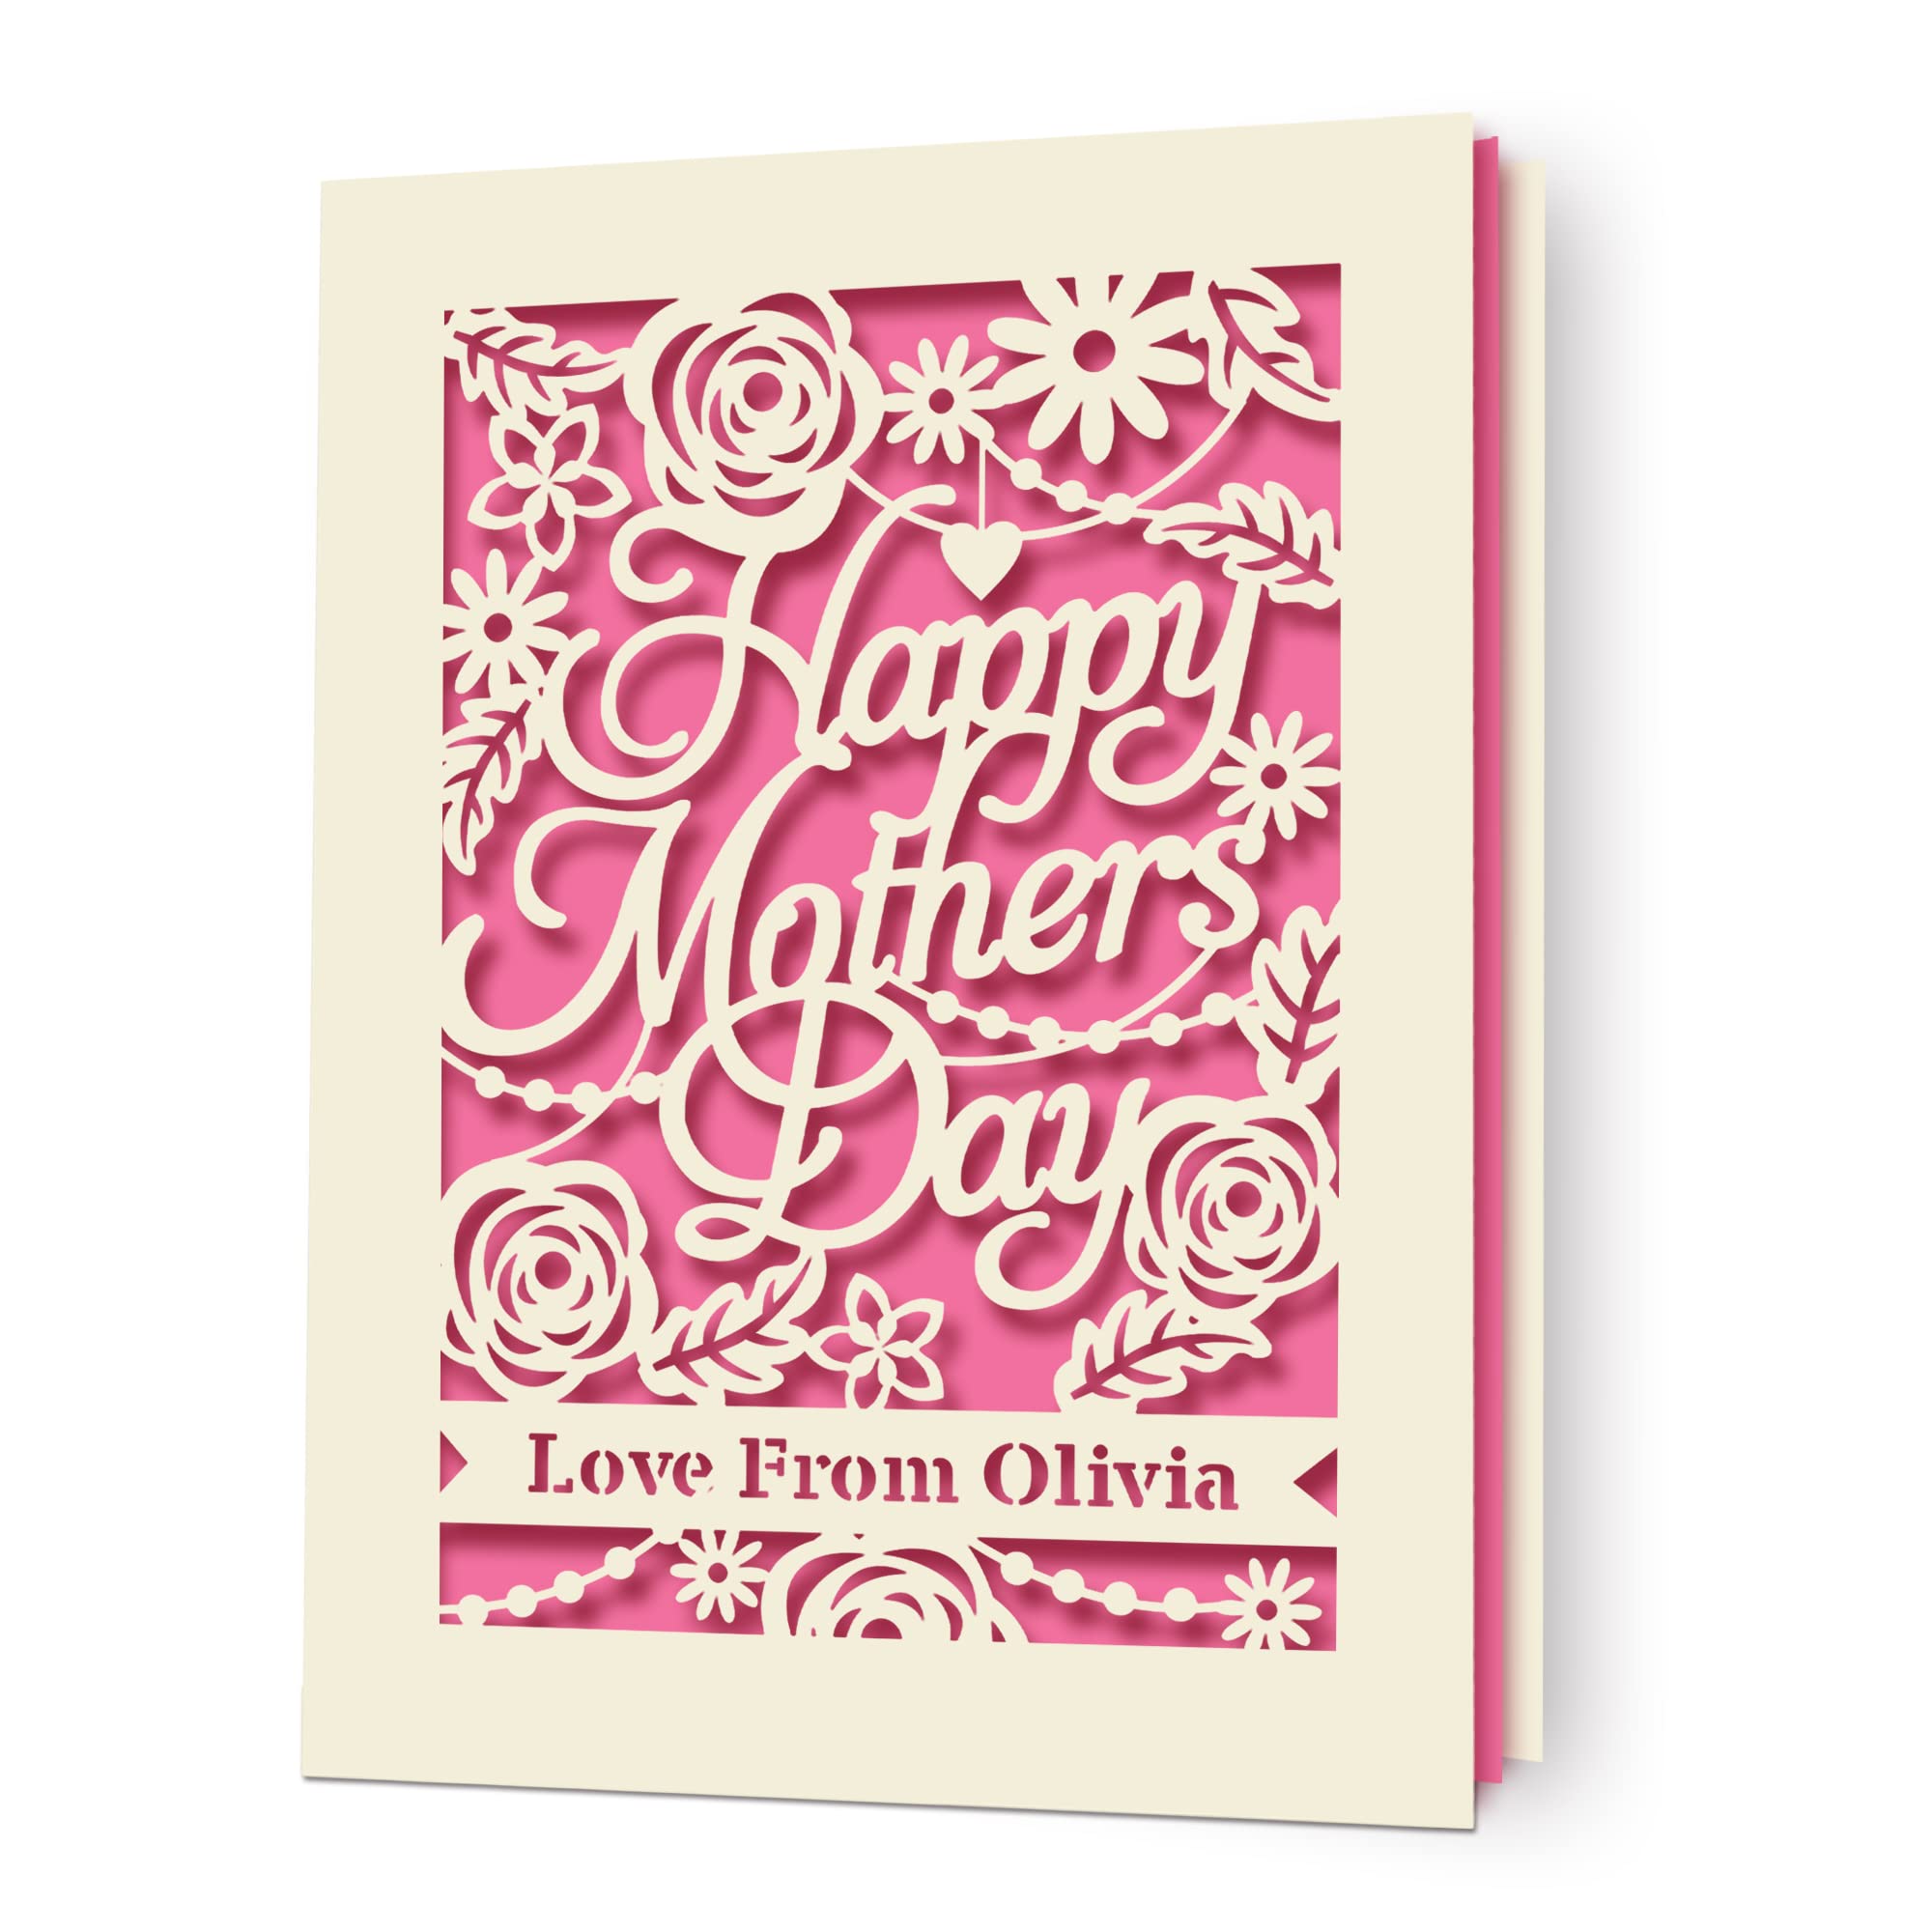 Amazon.com : EDSG Personalized Mothers Day Card Mothers Day Gifts ...